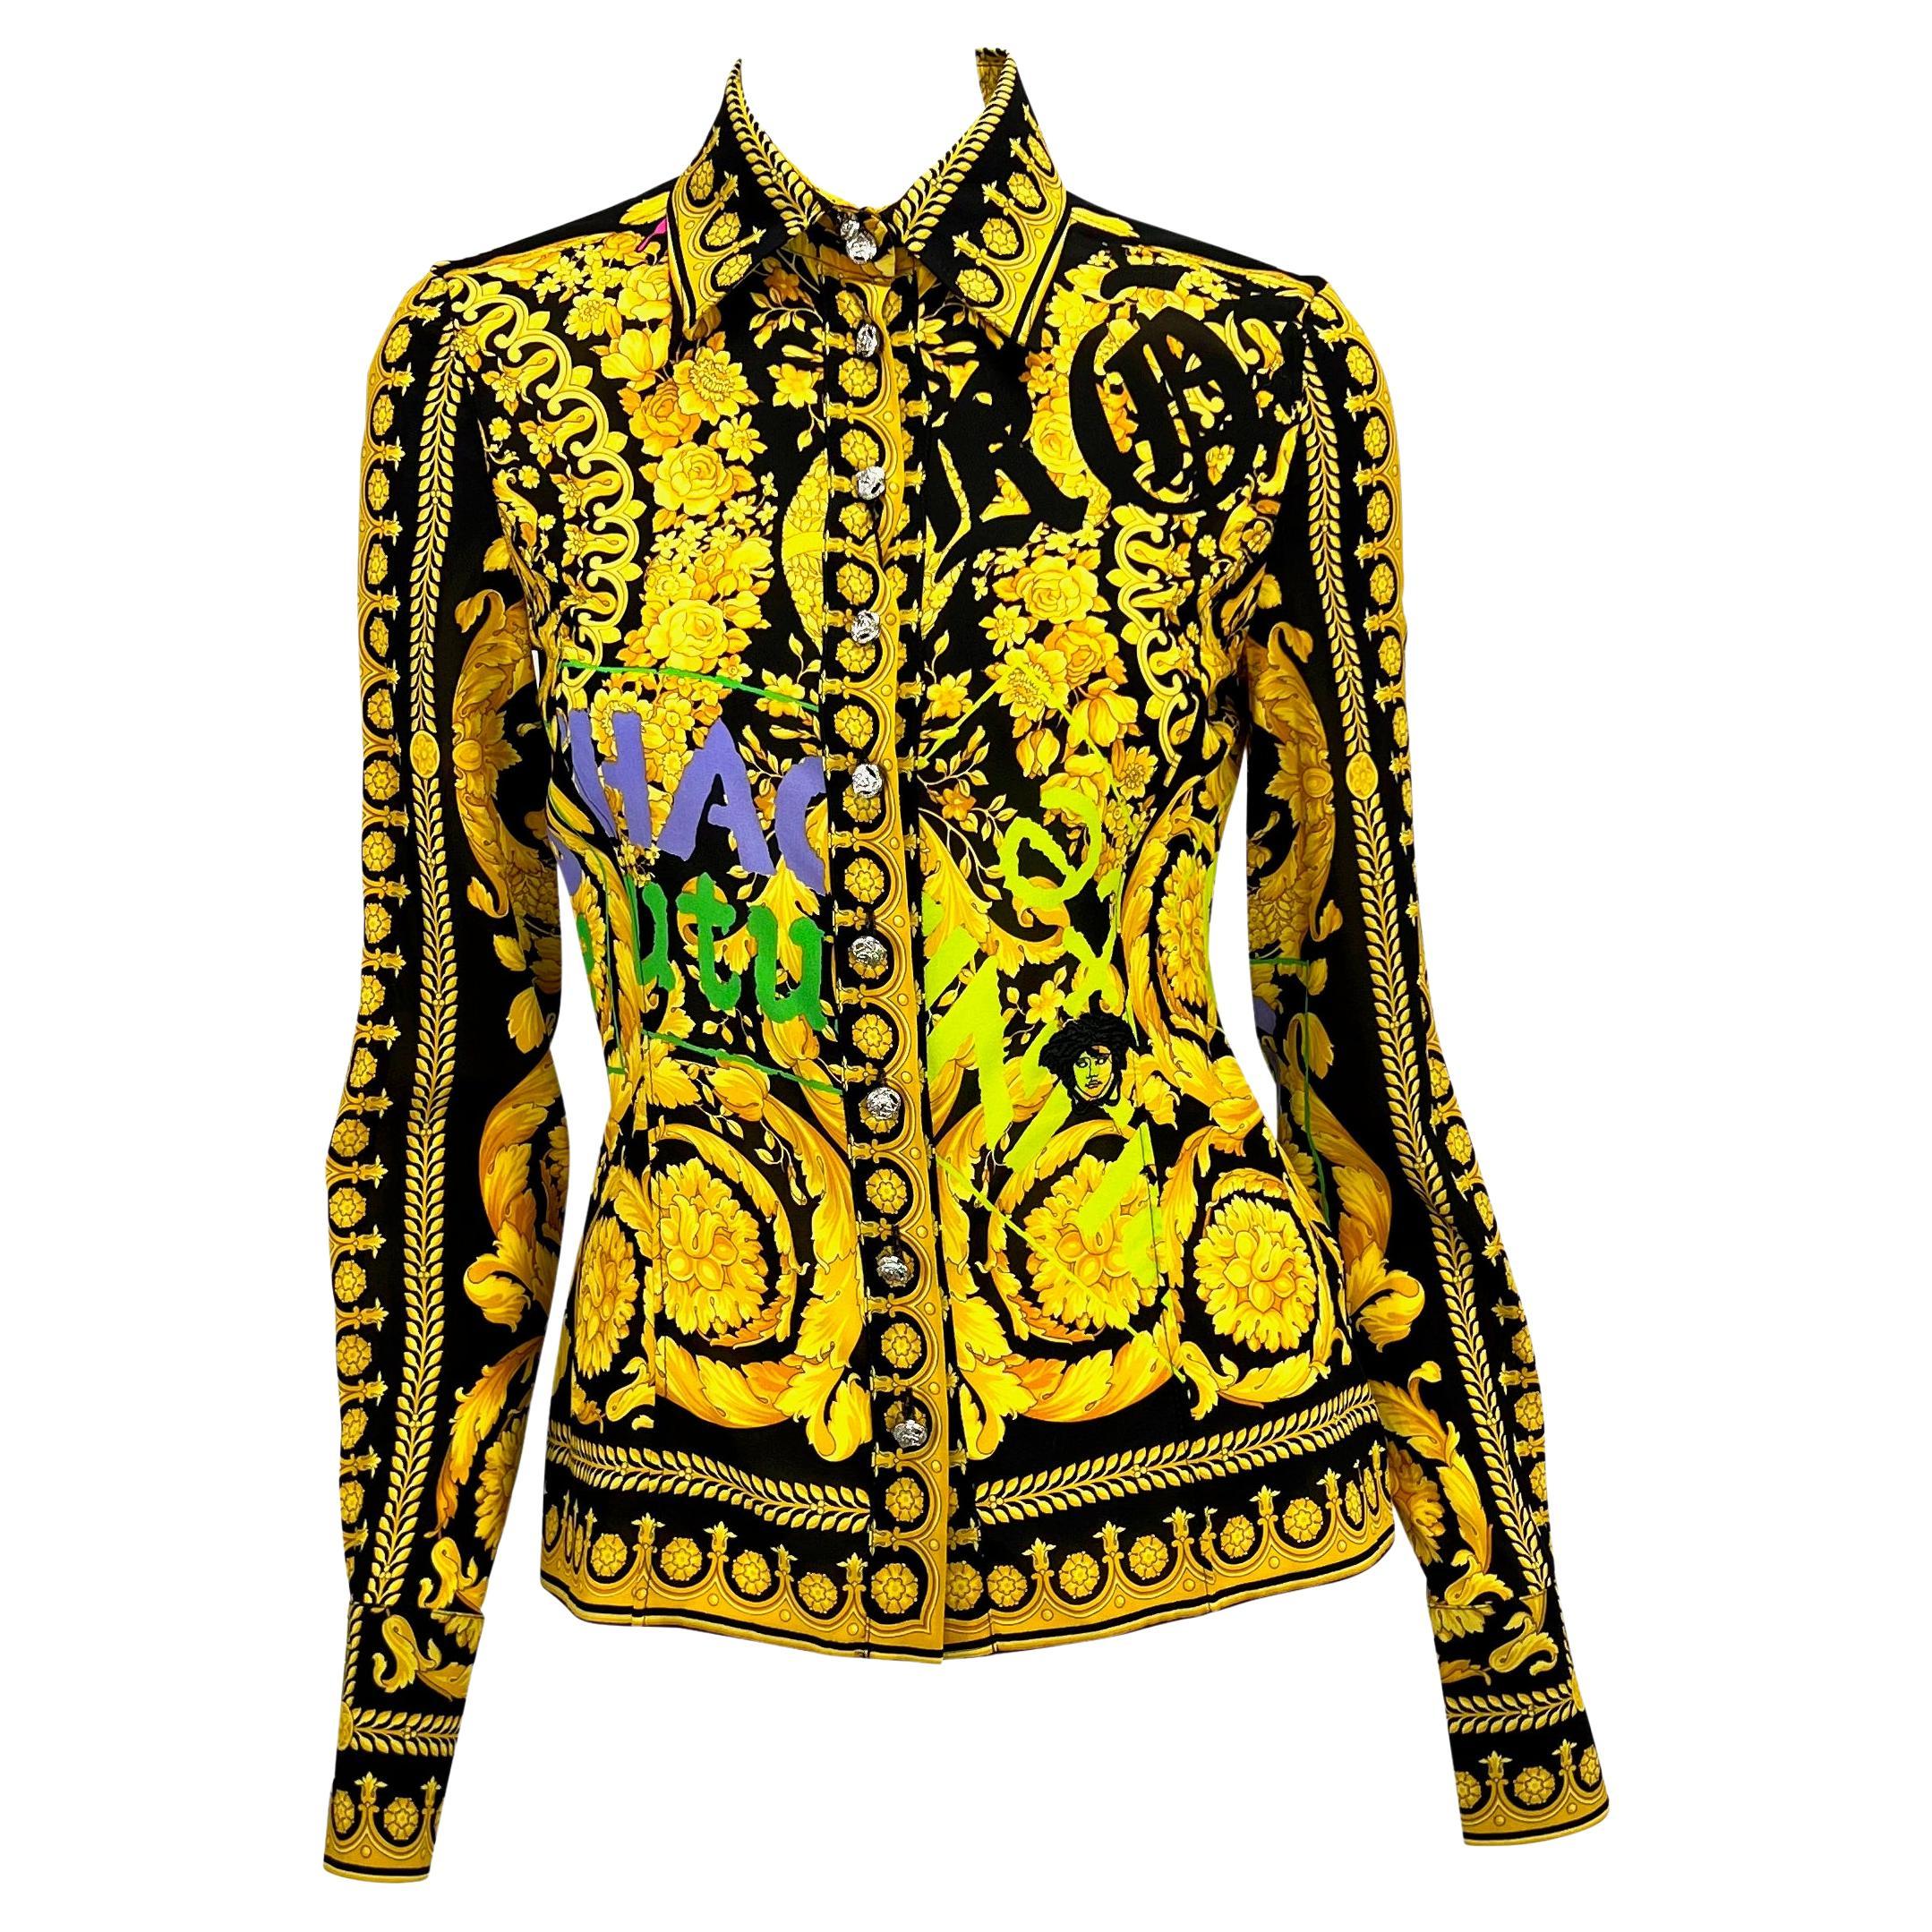 S/S 2005 Versace by Donatella Chaos Couture Gold Baroque Graffiti Print Top NWT